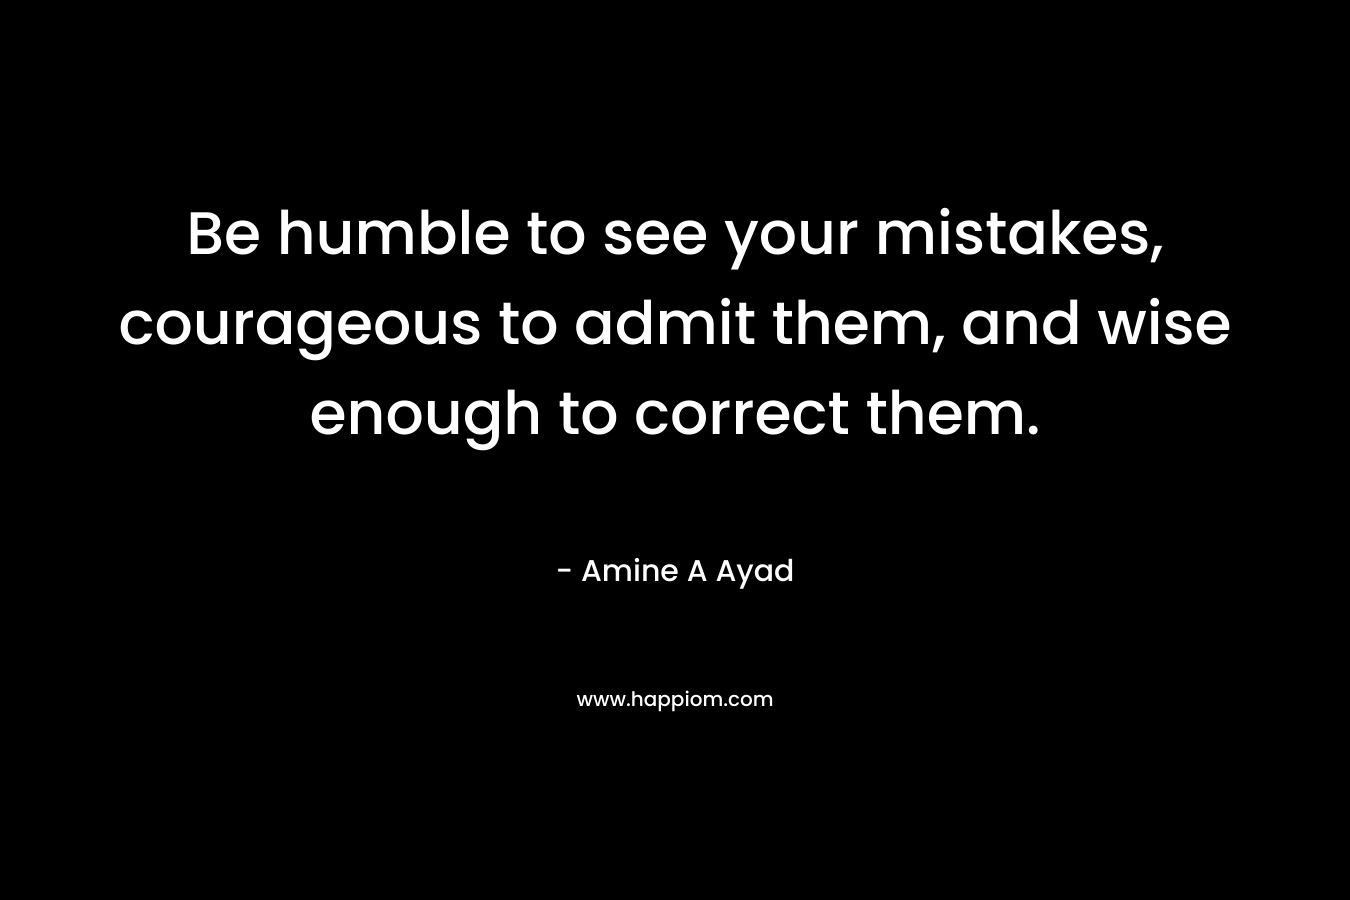 Be humble to see your mistakes, courageous to admit them, and wise enough to correct them. – Amine A Ayad